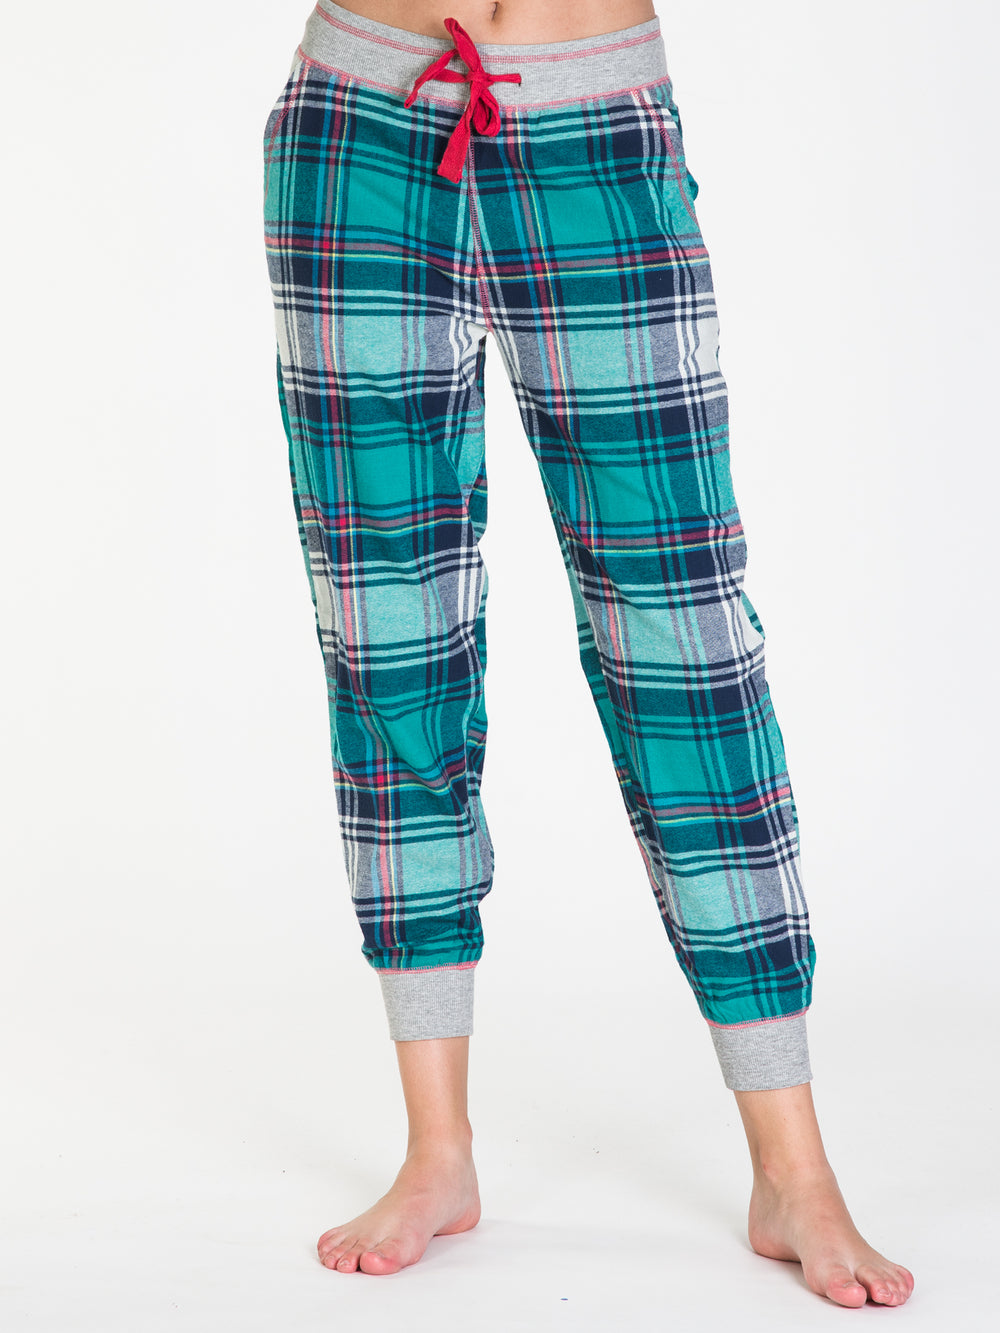 HARLOW KYLIE FLANNEL PANT - CLEARANCE